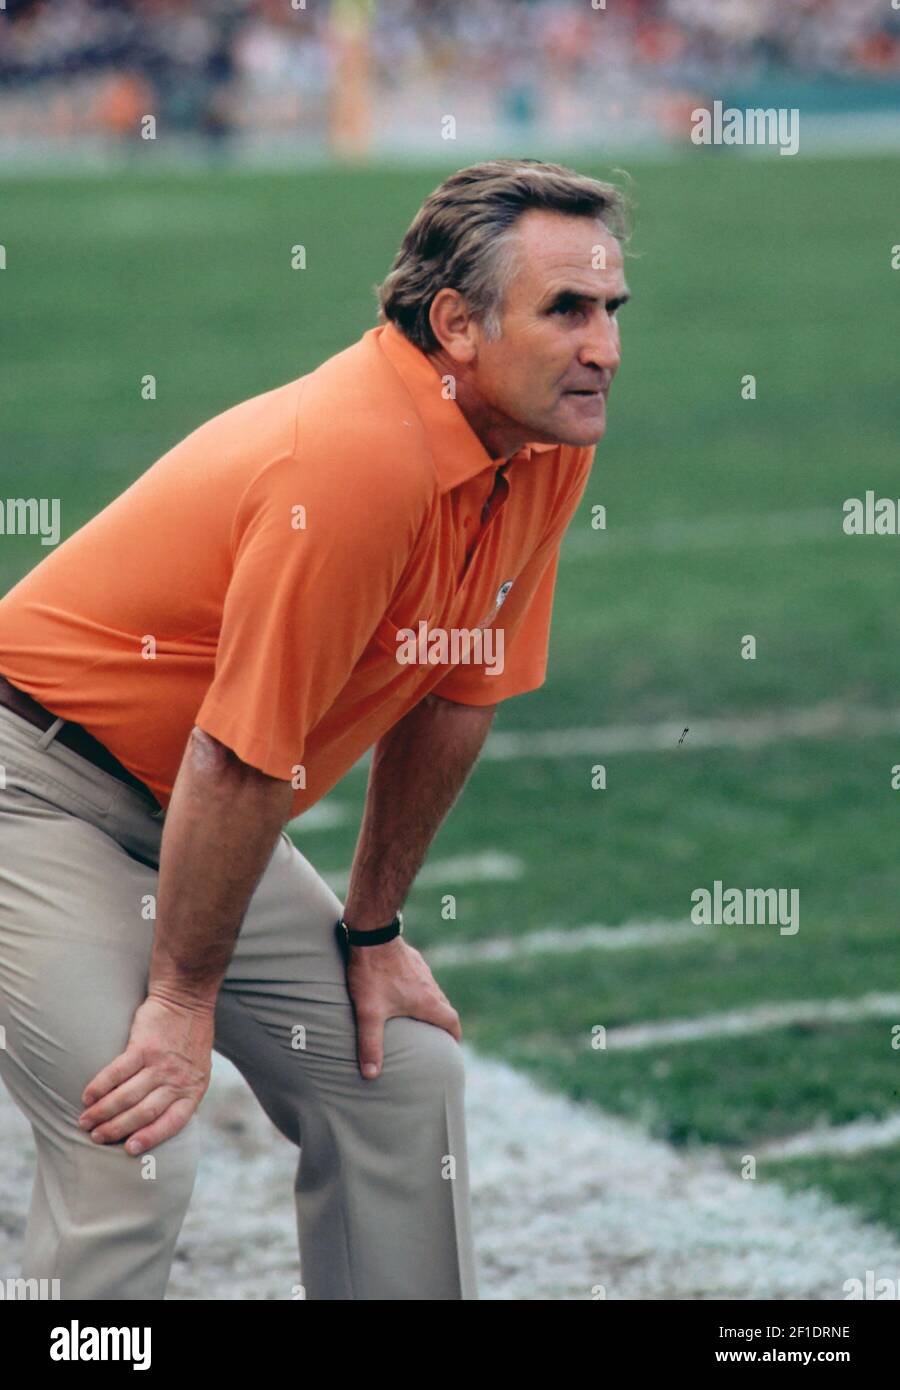 Jan 8, 1983; Miami, FL, USA; FILE PHOTO; Miami Dolphins head coach Don Shula on the sidelines during the 1982 AFC Divisional Playoff Game against the New England Patriots at the Orange Bowl. The Dolphins defeated the Patriots 28-13. Mandatory Credit: Tony Tomsic-USA TODAY NETWORK (Photo by Tony Tomsic-USA Today Network/Sipa USA) Stock Photo